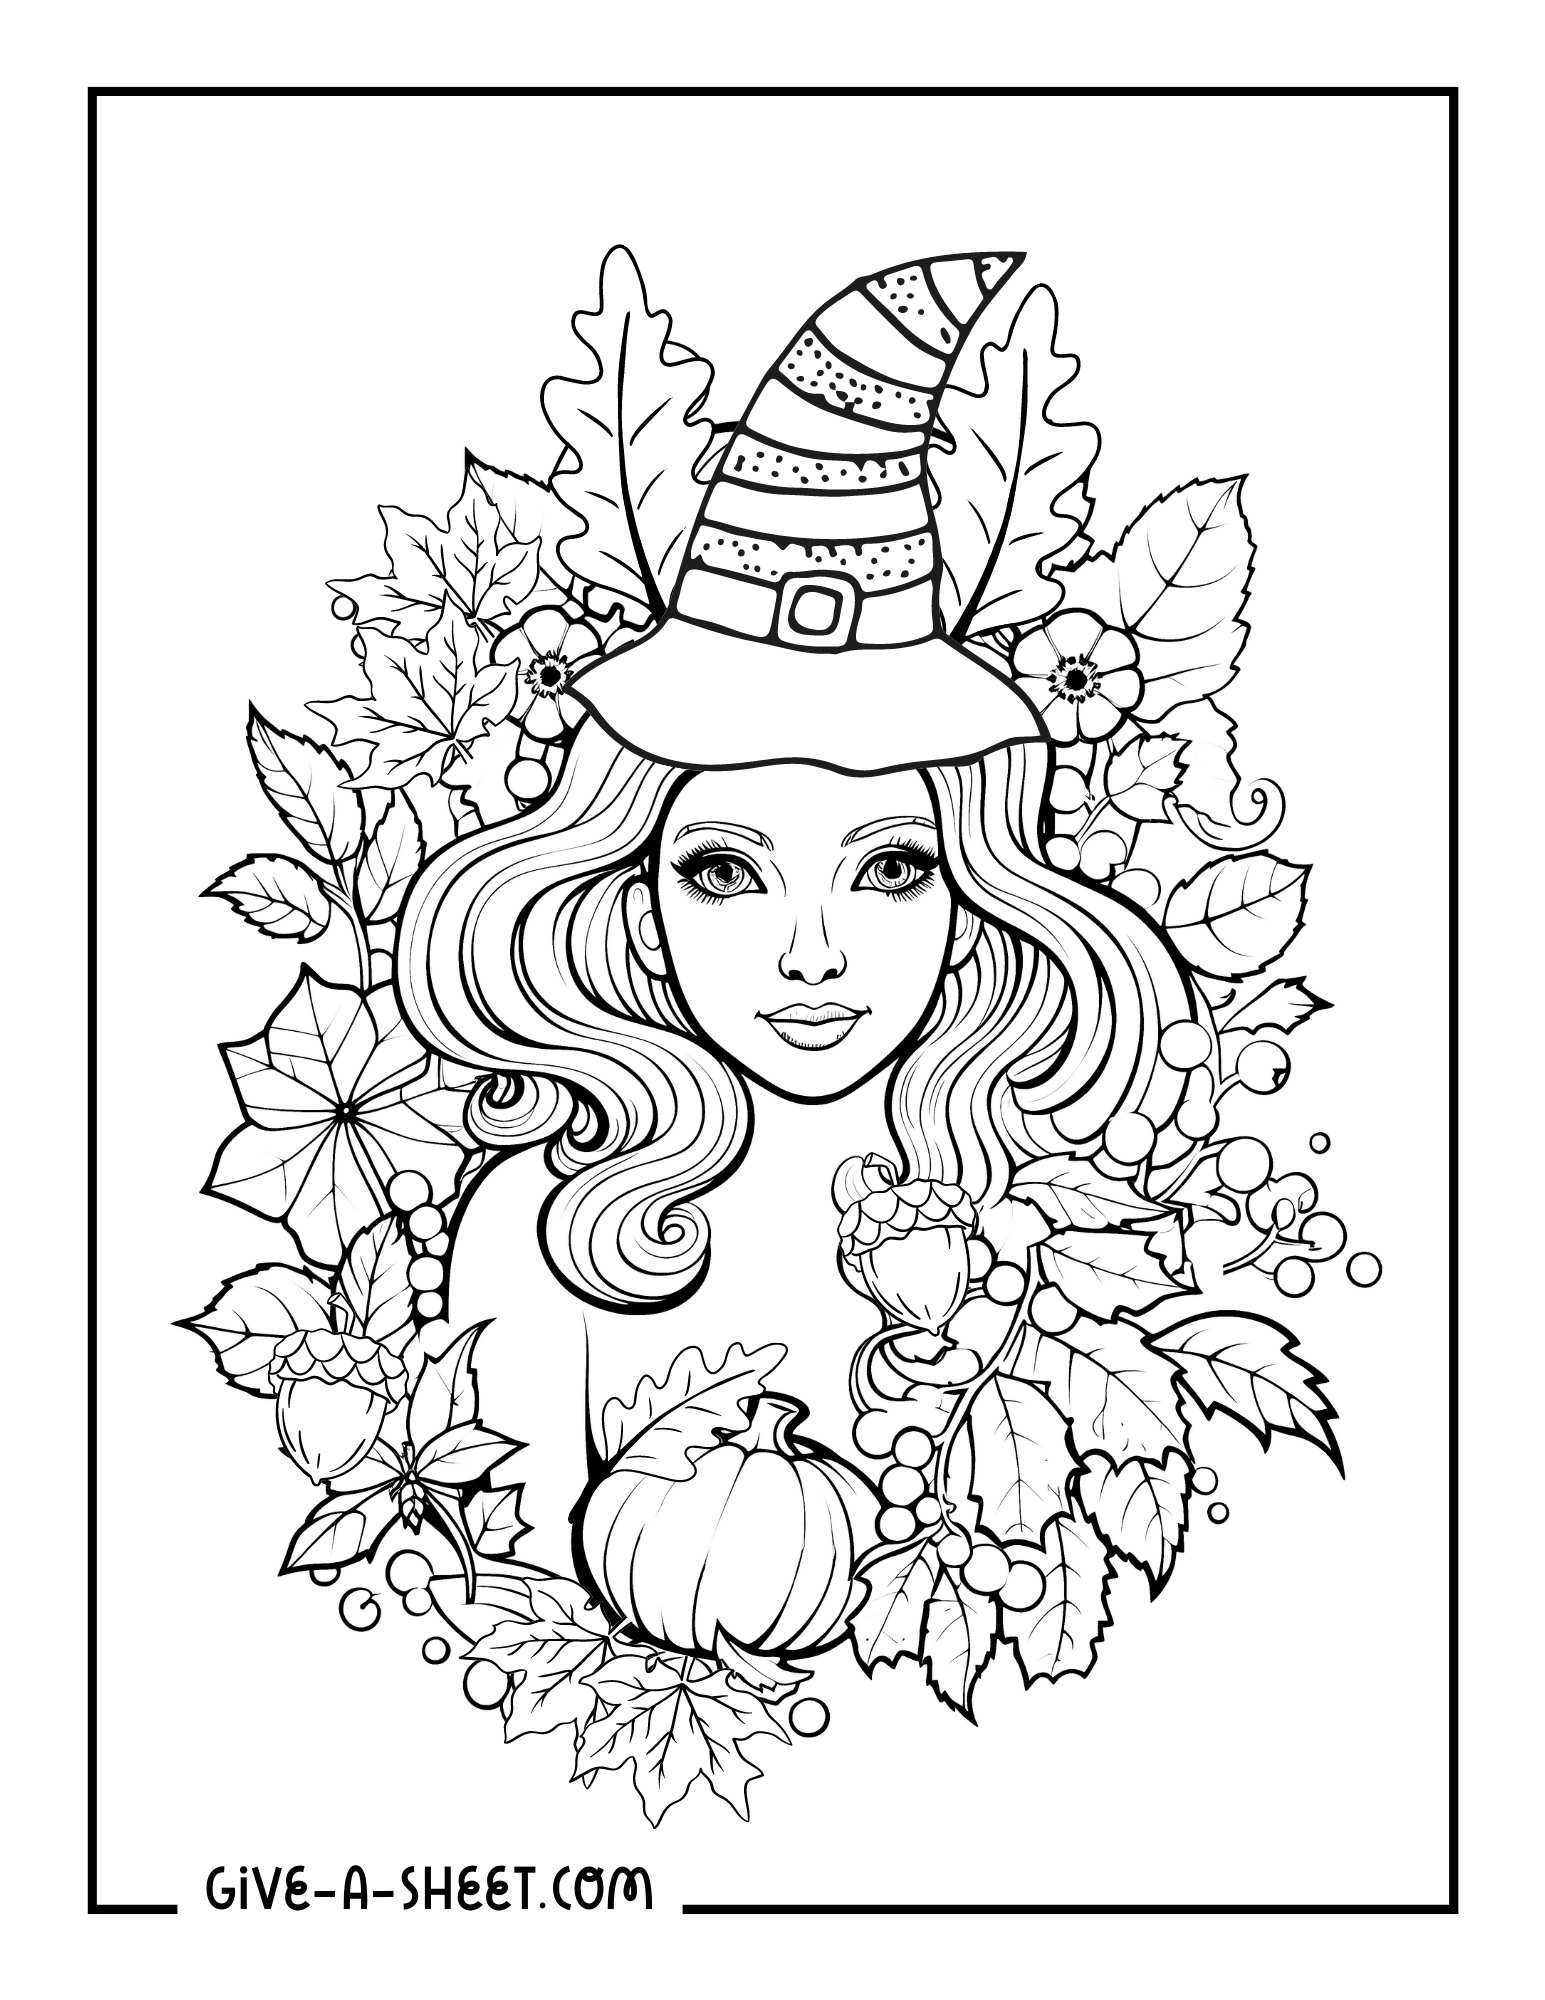 Leaf goddess with intricate designs coloring page for adults.